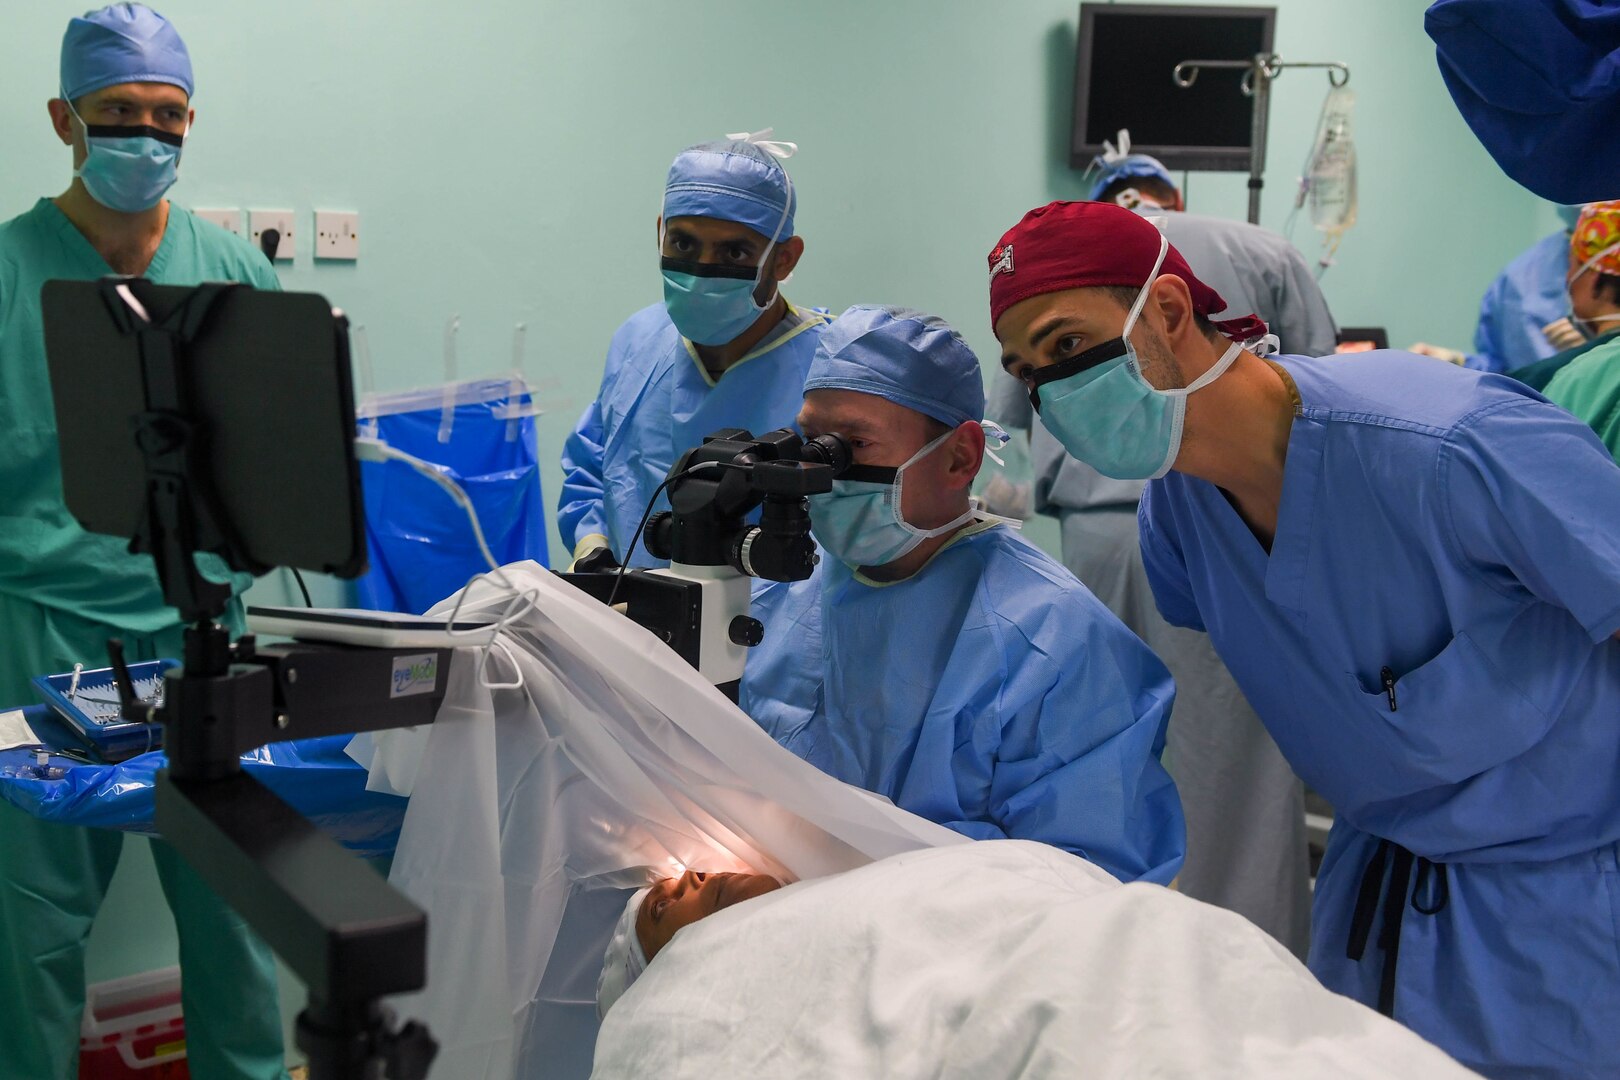 U.S. service members observe a cataract surgery during New Horizons exercise 2019 at Port Mourant, Guyana, May 6, 2019. The New Horizons exercise 2019 provides U.S. military members an opportunity to train for an overseas deployment and the logistical requirements it entails. The exercise promotes bilateral cooperation by providing opportunities for U.S. and partner nation military engineers, medical personnel and support staff to work and train side by side.